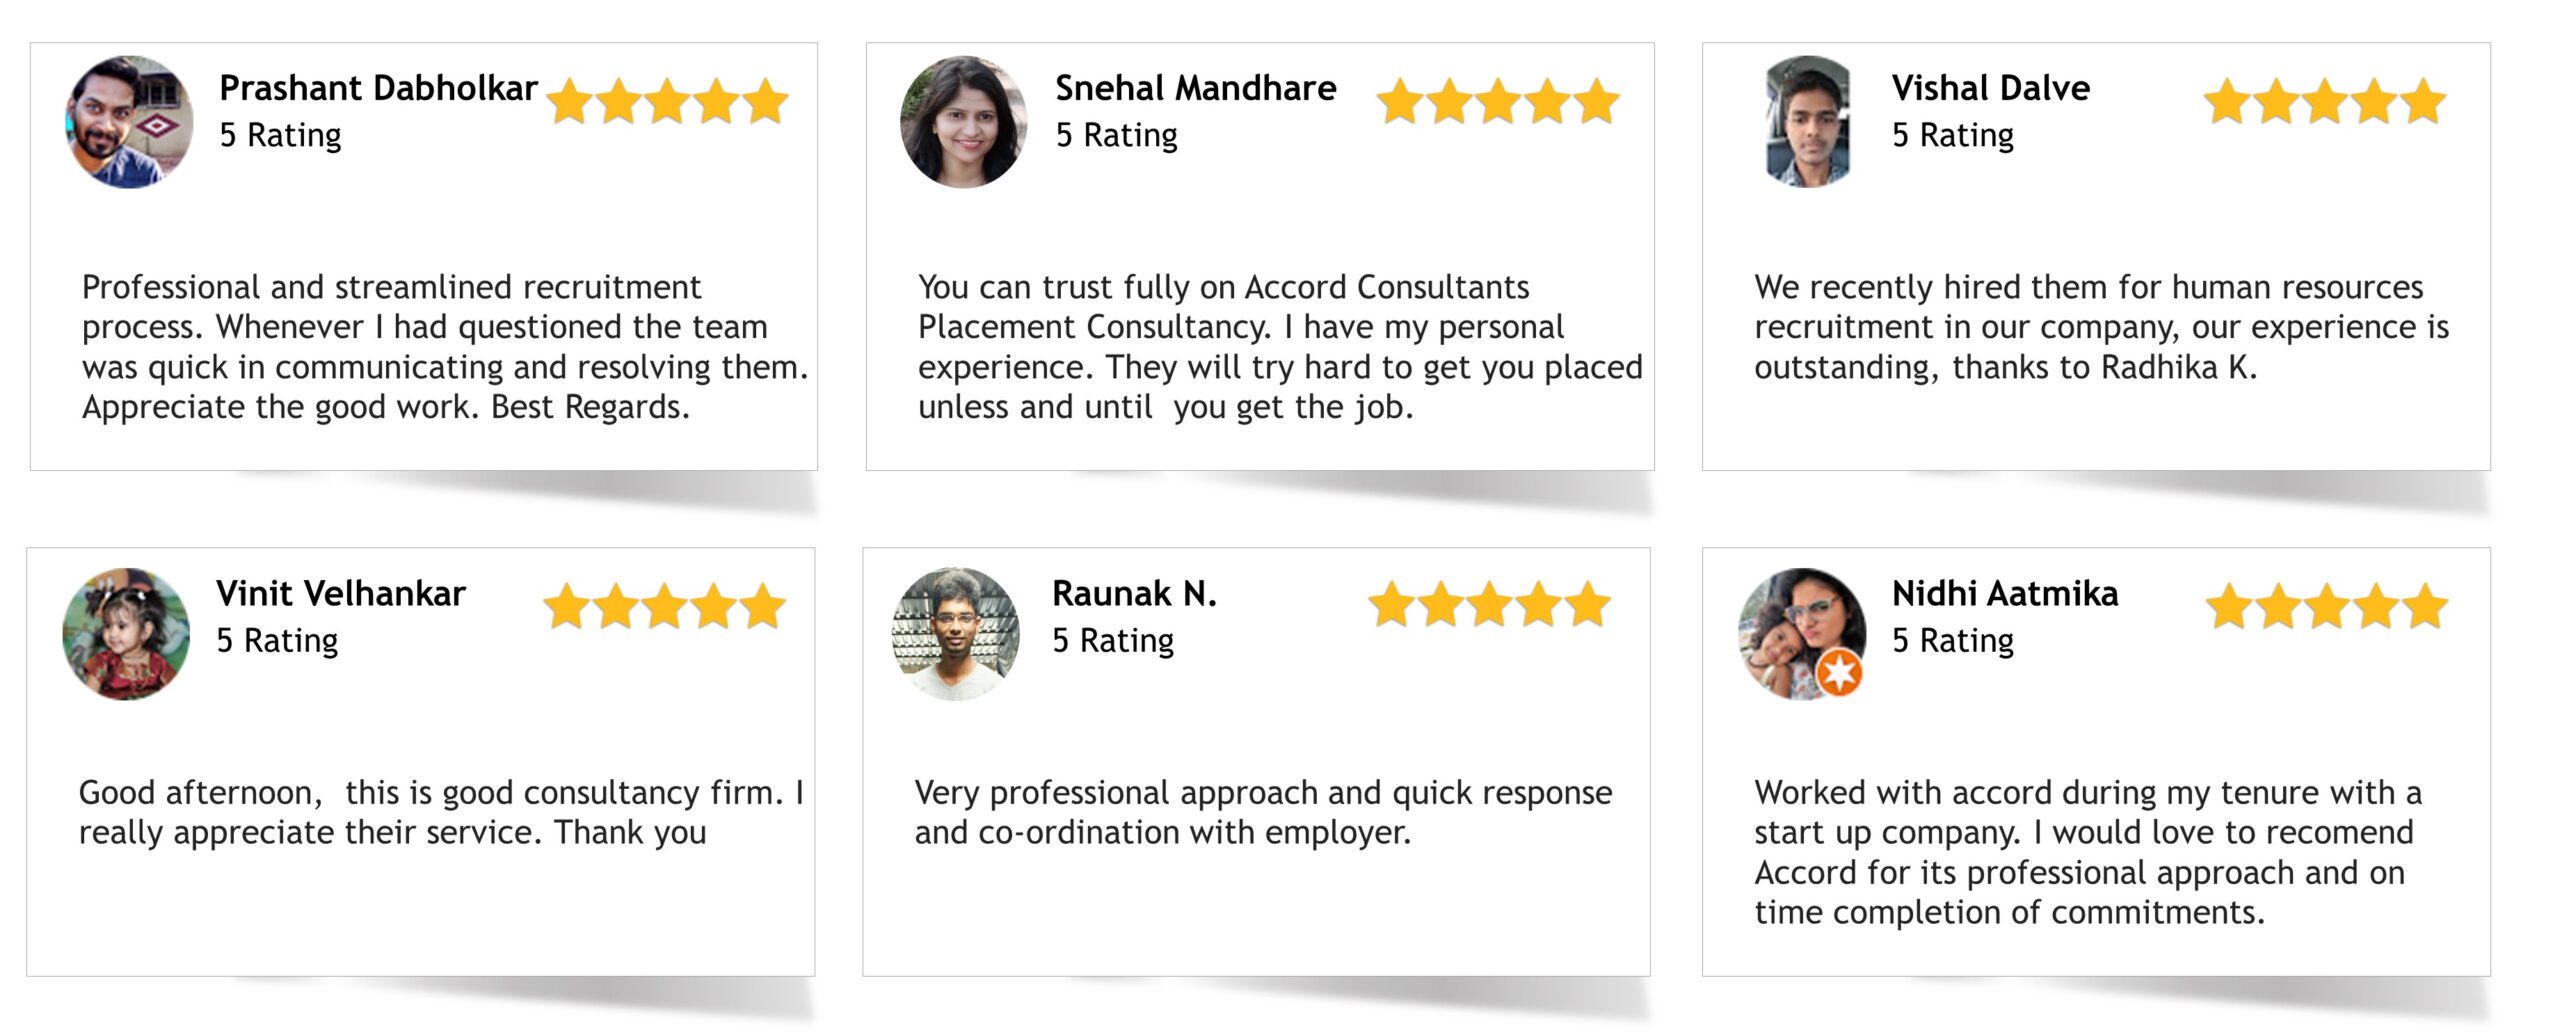 Accord-Consultants-website-review-on-manpower-consultancy-services